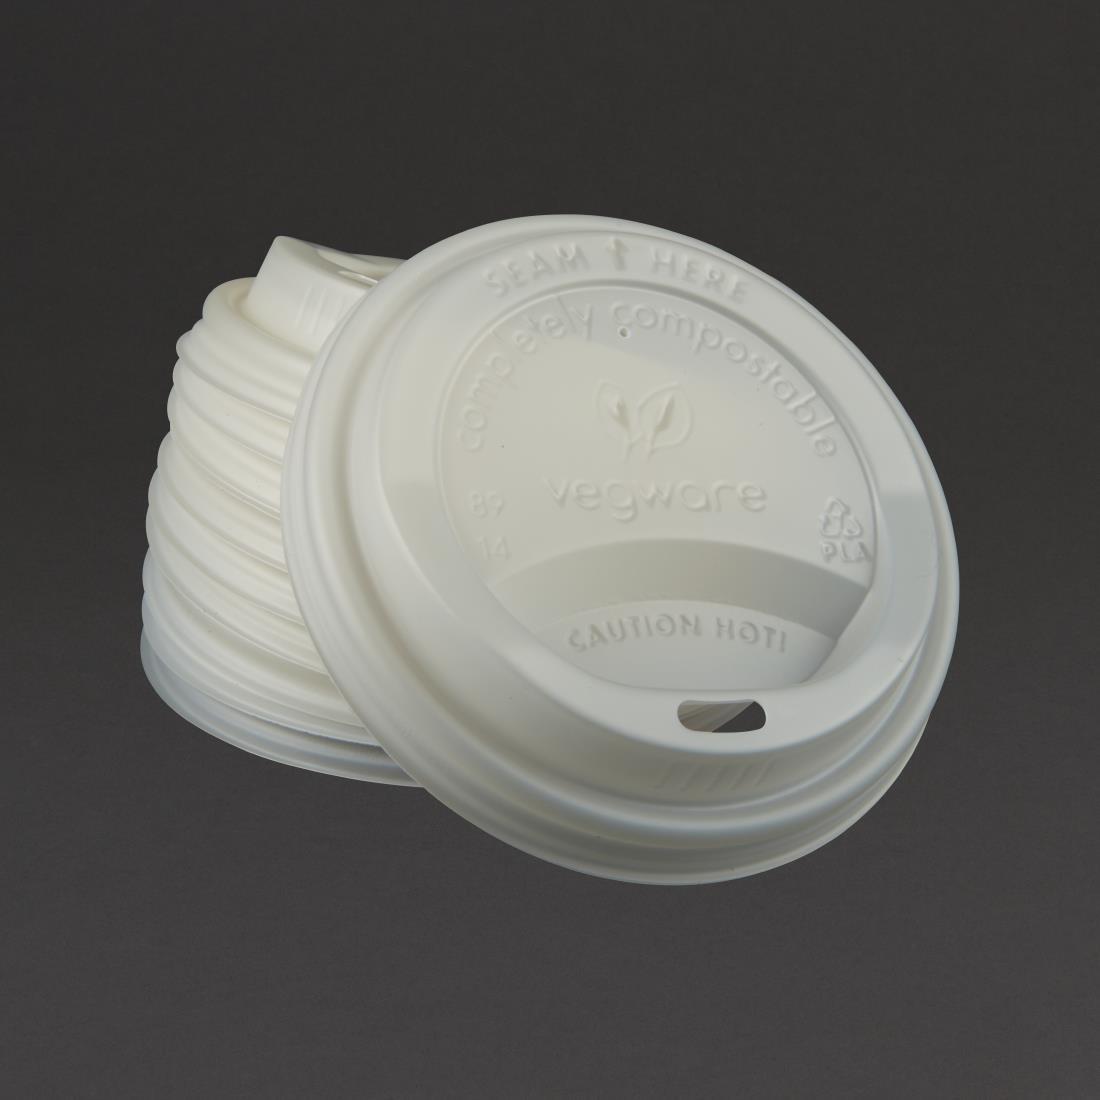 Vegware Compostable Coffee Cup Lids 340ml / 12oz and 455ml / 16oz (Pack of 1000) - GH023  - 4